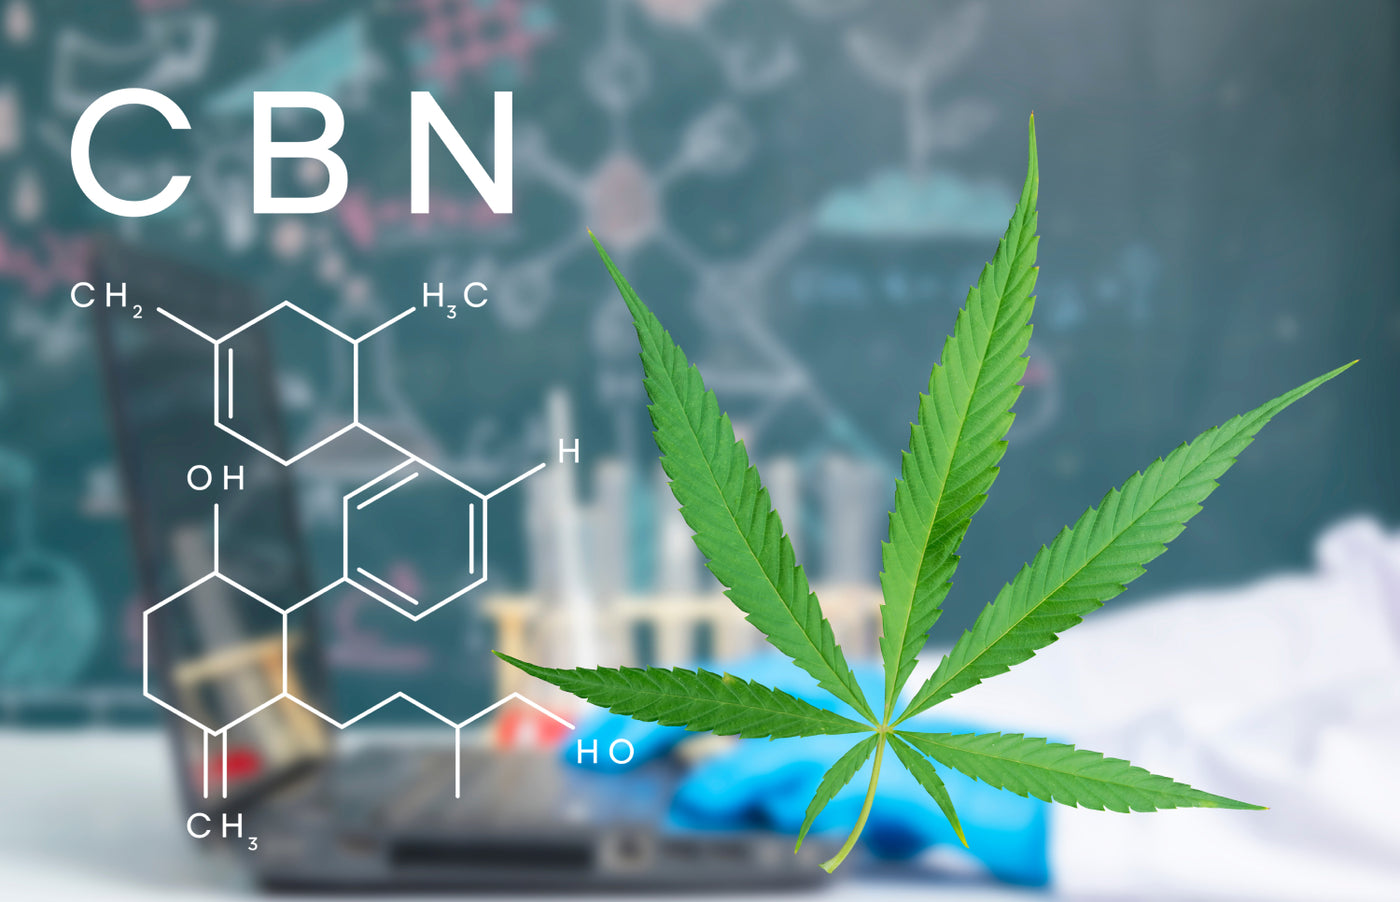 CBN vs. CBD: Differences, benefits, uses, & more